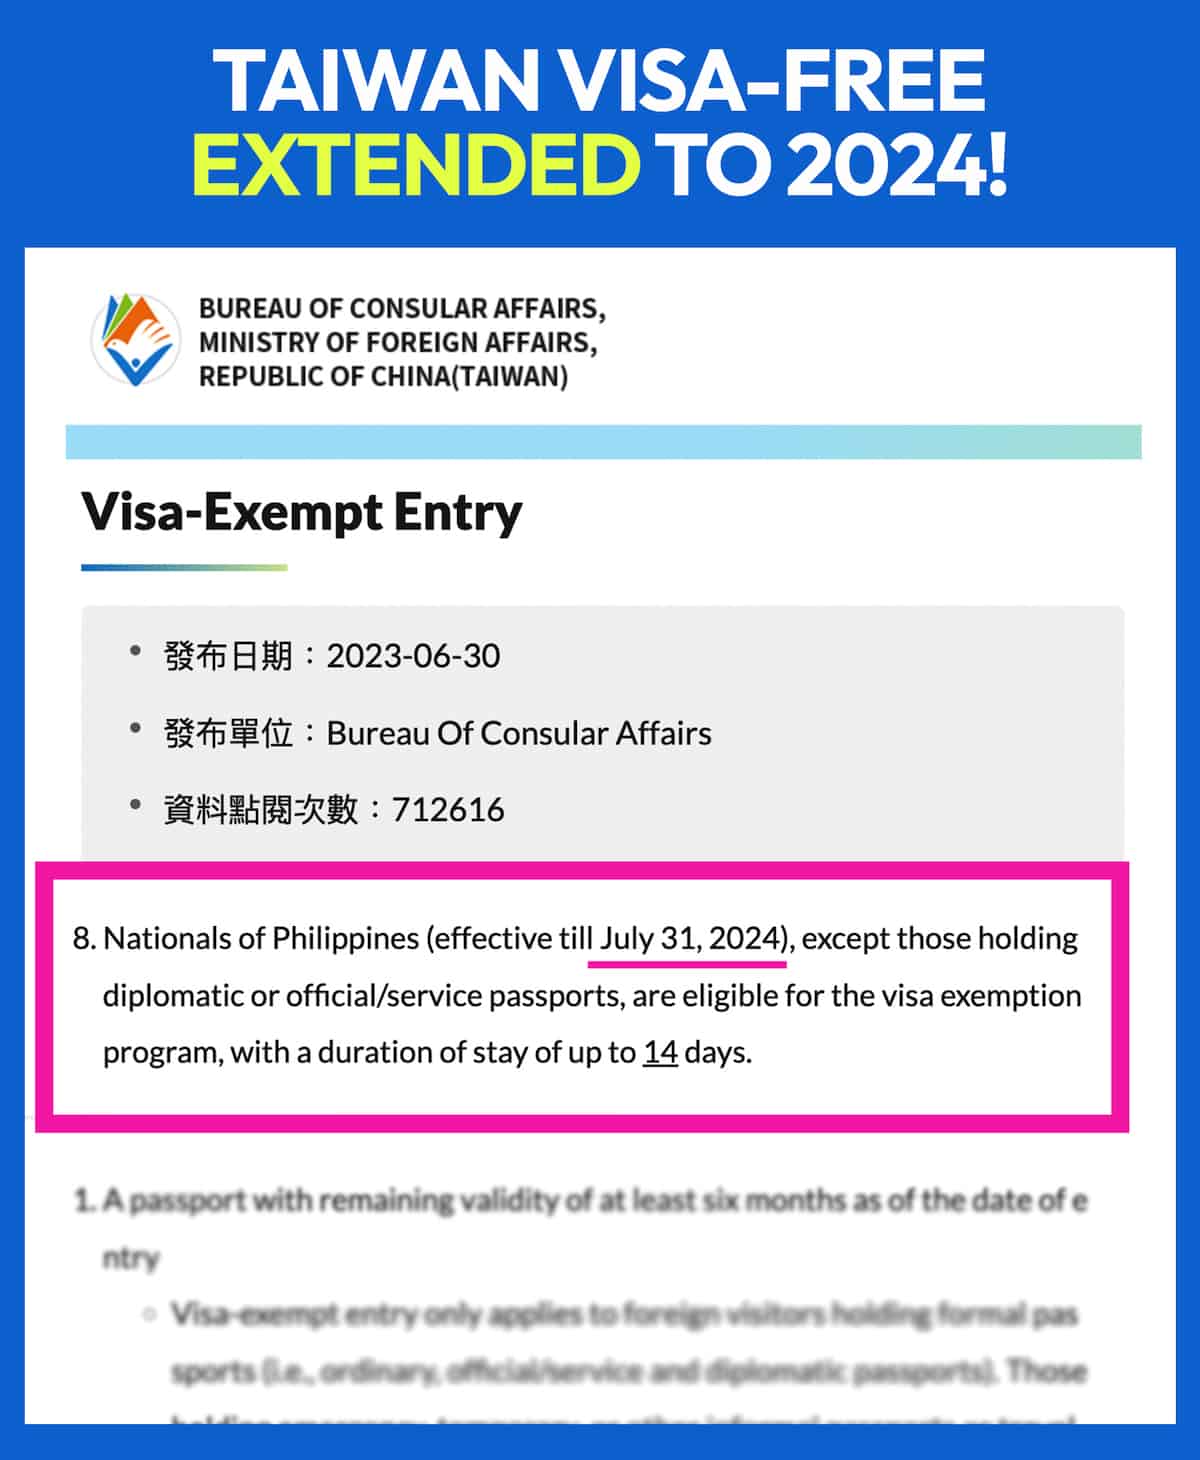 Taiwan Visa Free Extended to 2024